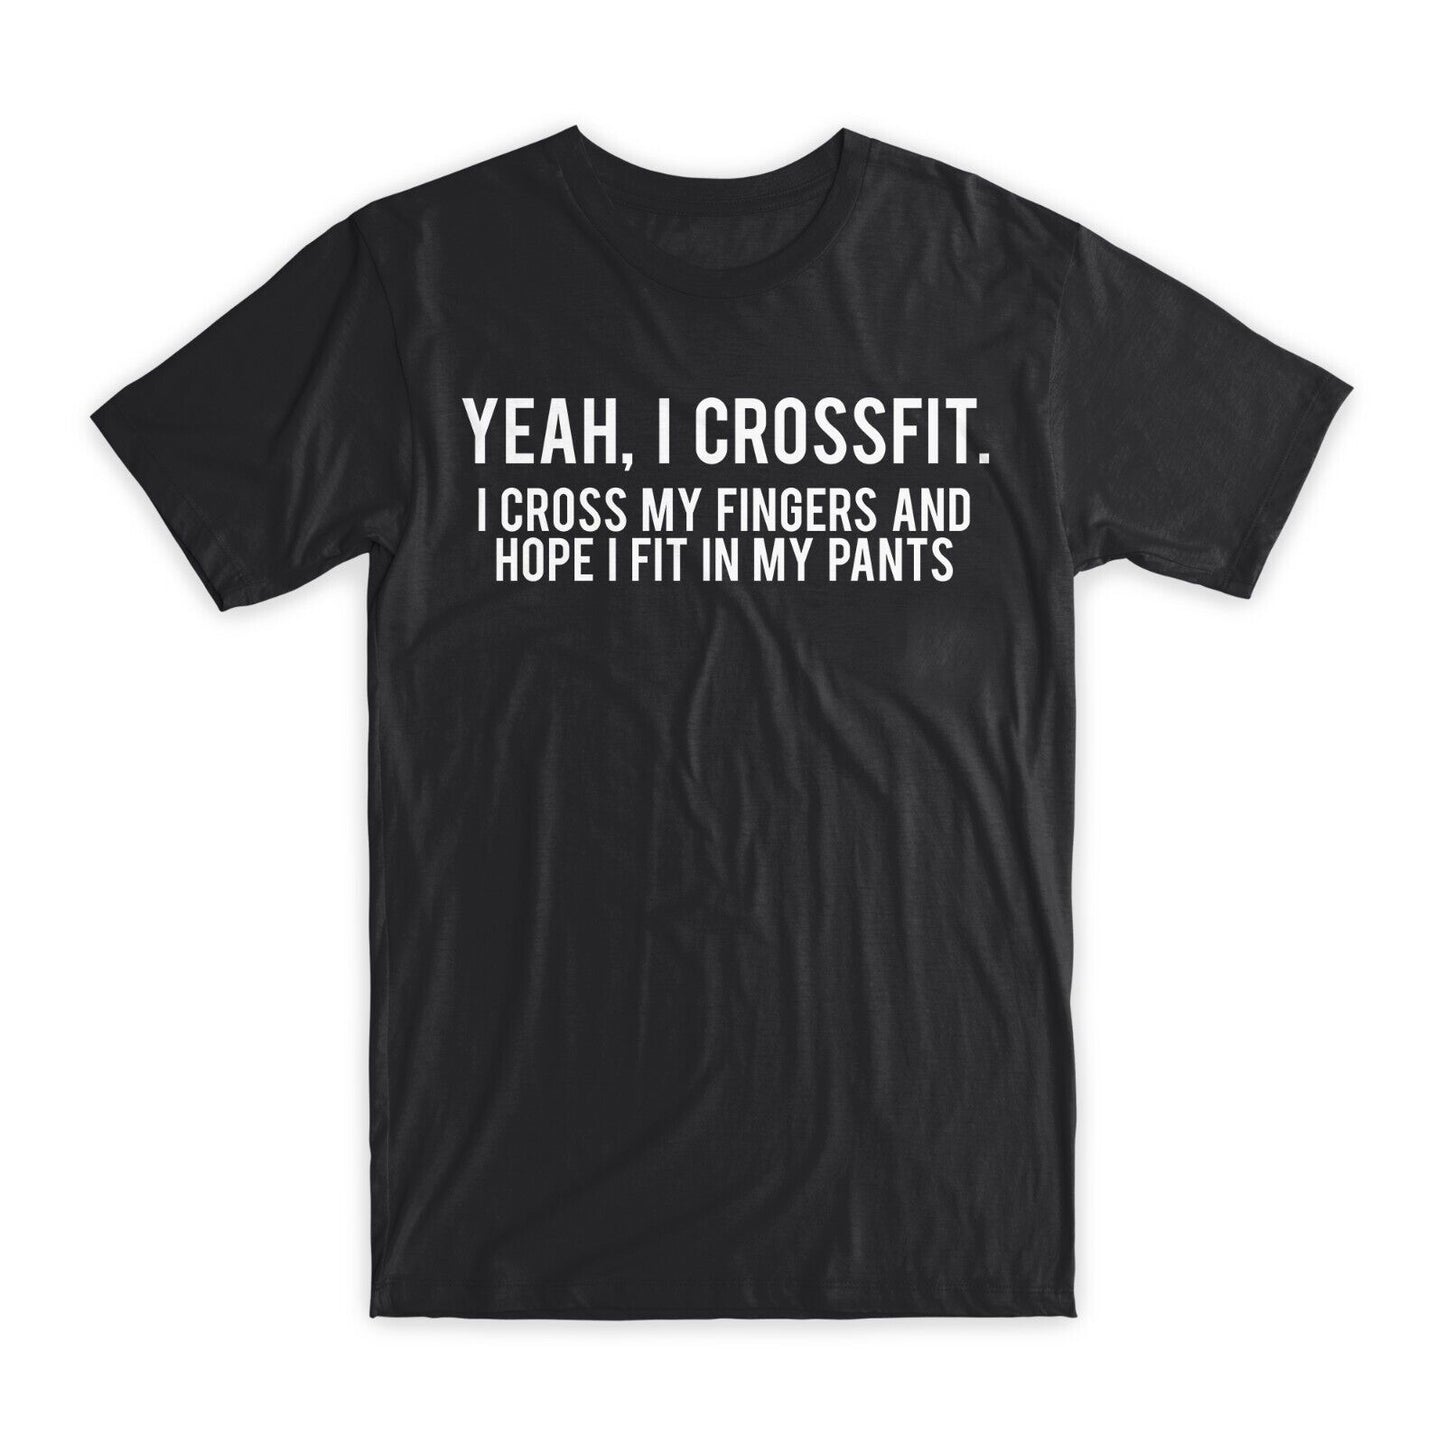 Yeah I Crossfit T-Shirt Premium Soft Cotton Crew Neck Funny Tee Novelty Gift NEW